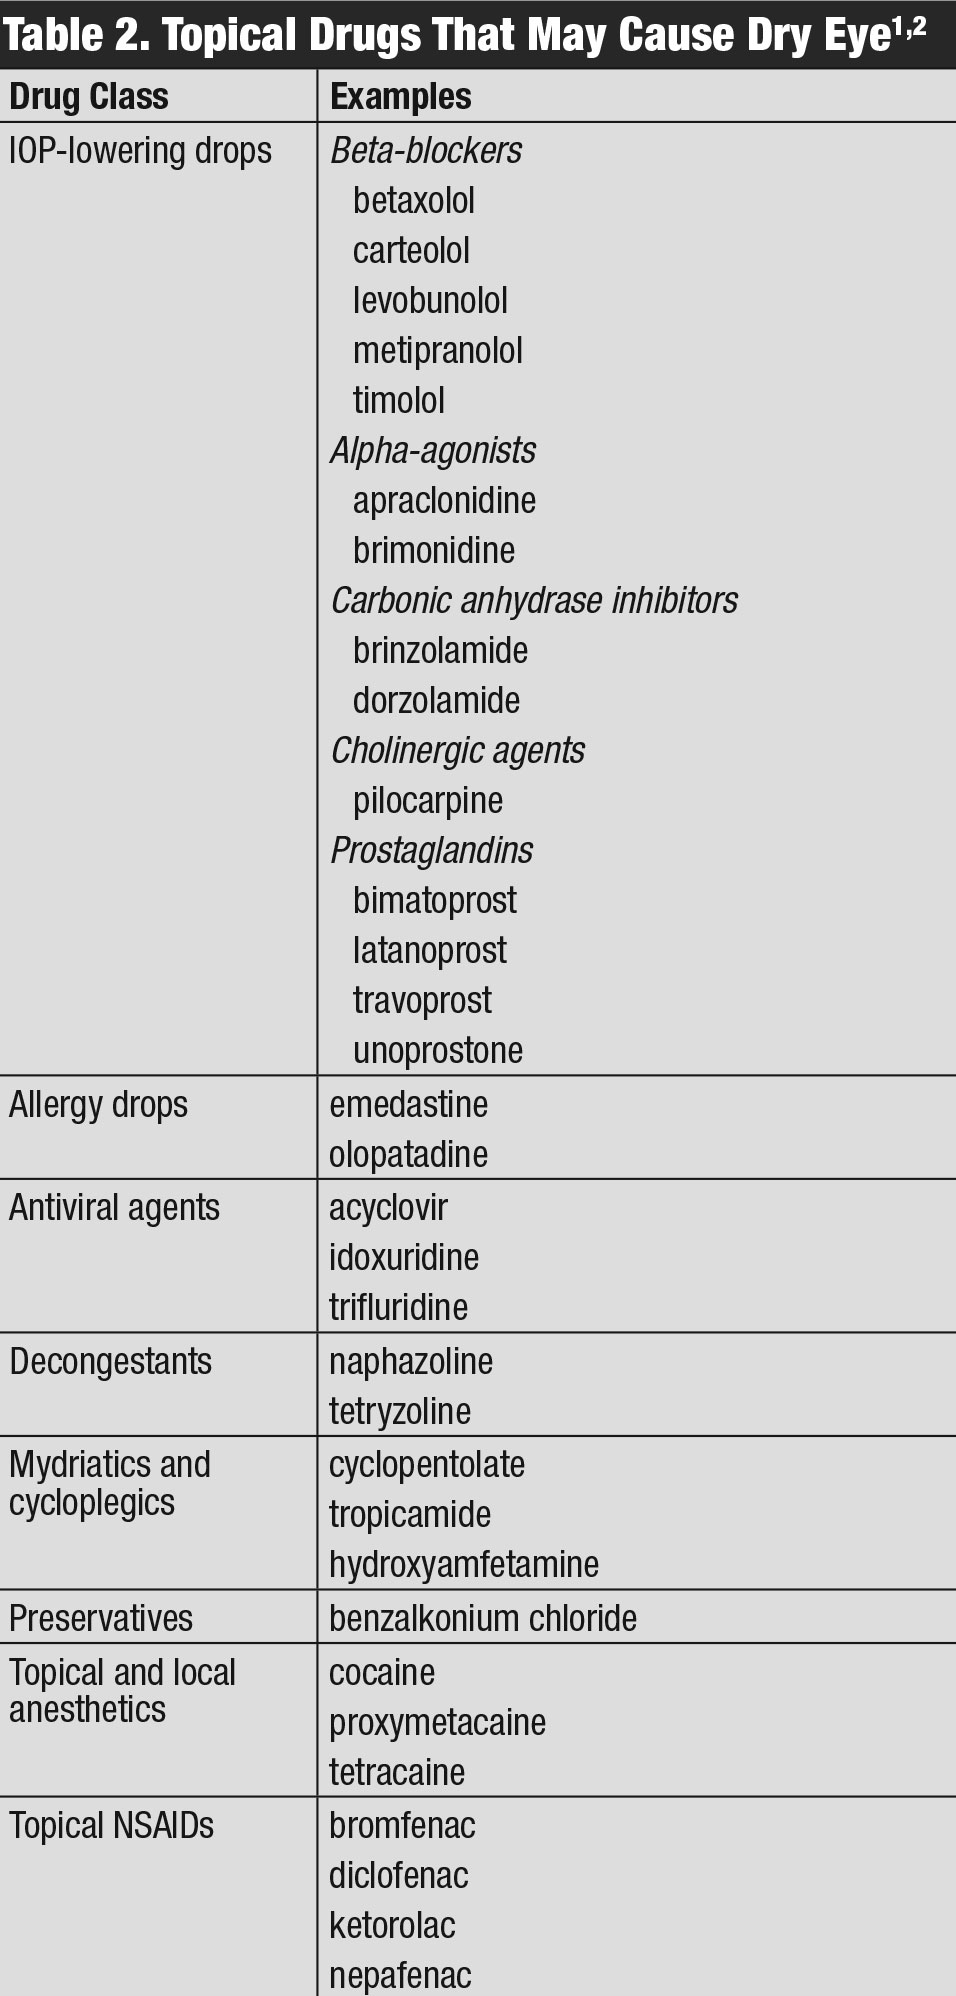 Topical Drugs That May Cause Dry Eye